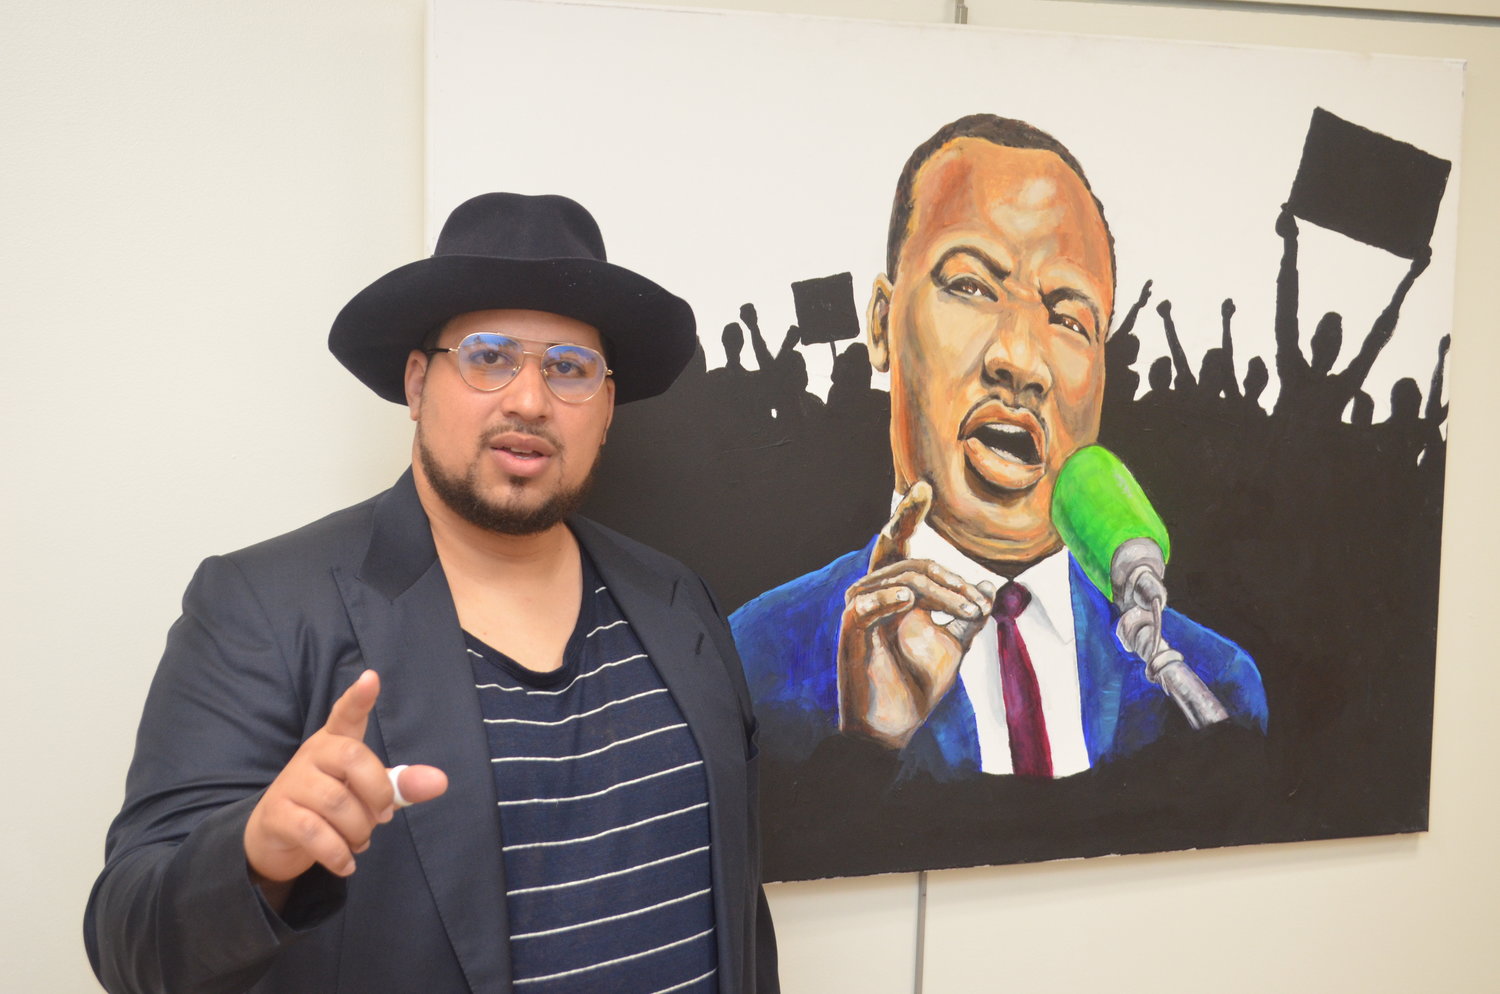 Ron McHenry, the first Black artist to hold a solo show at the Long Beach Public Library, with a portrait of the Rev. Dr. Martin Luther King Jr.